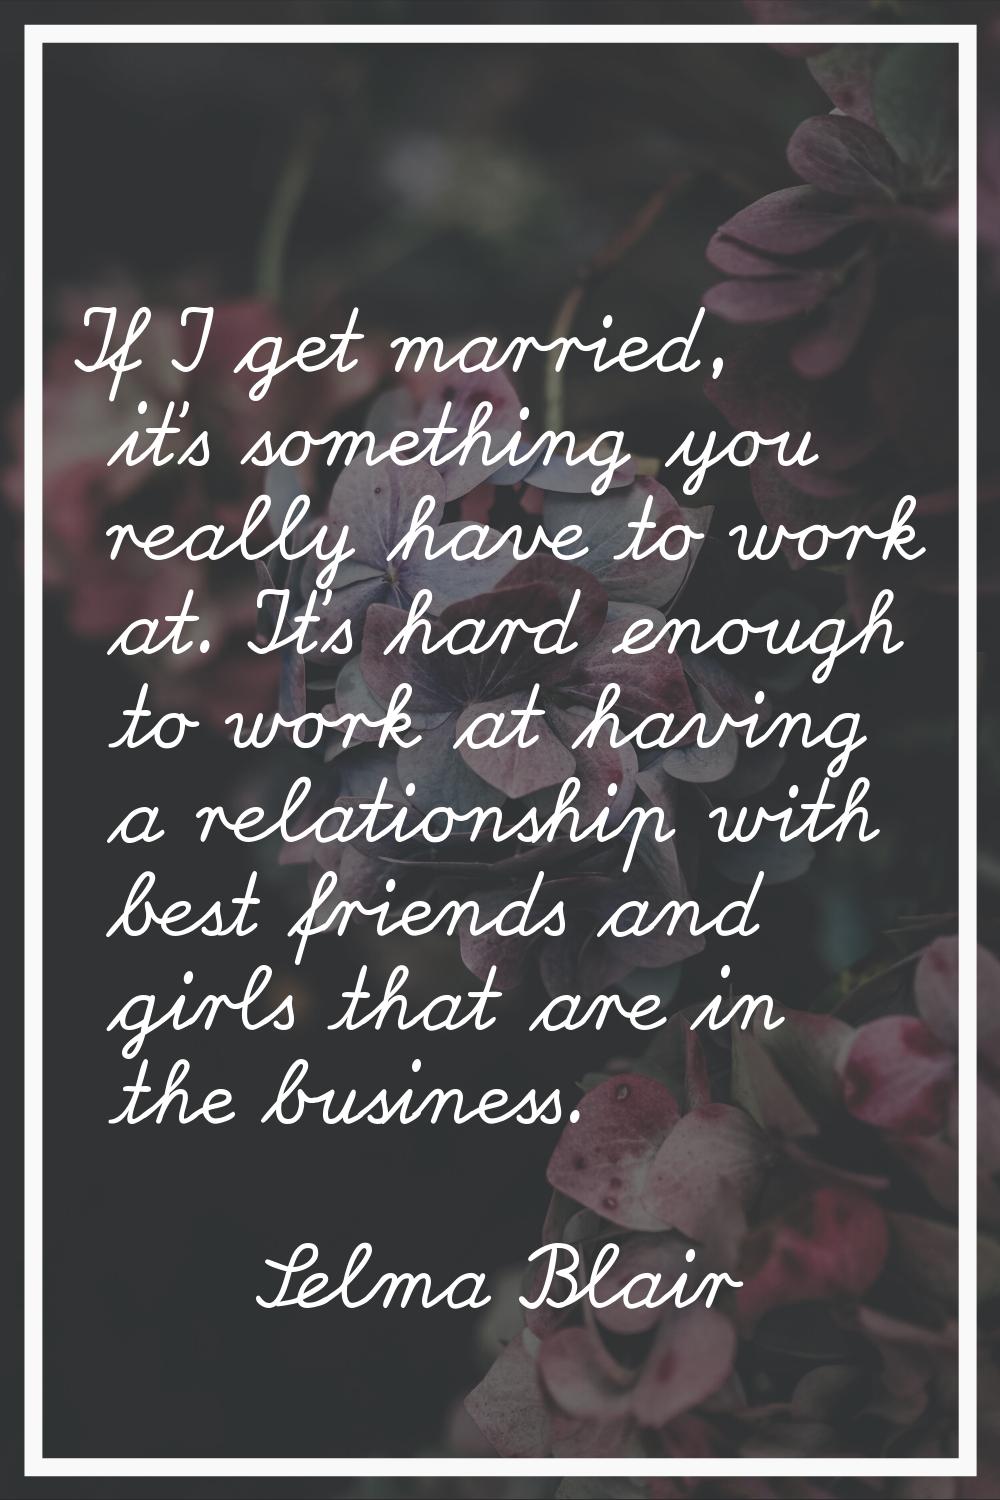 If I get married, it's something you really have to work at. It's hard enough to work at having a r